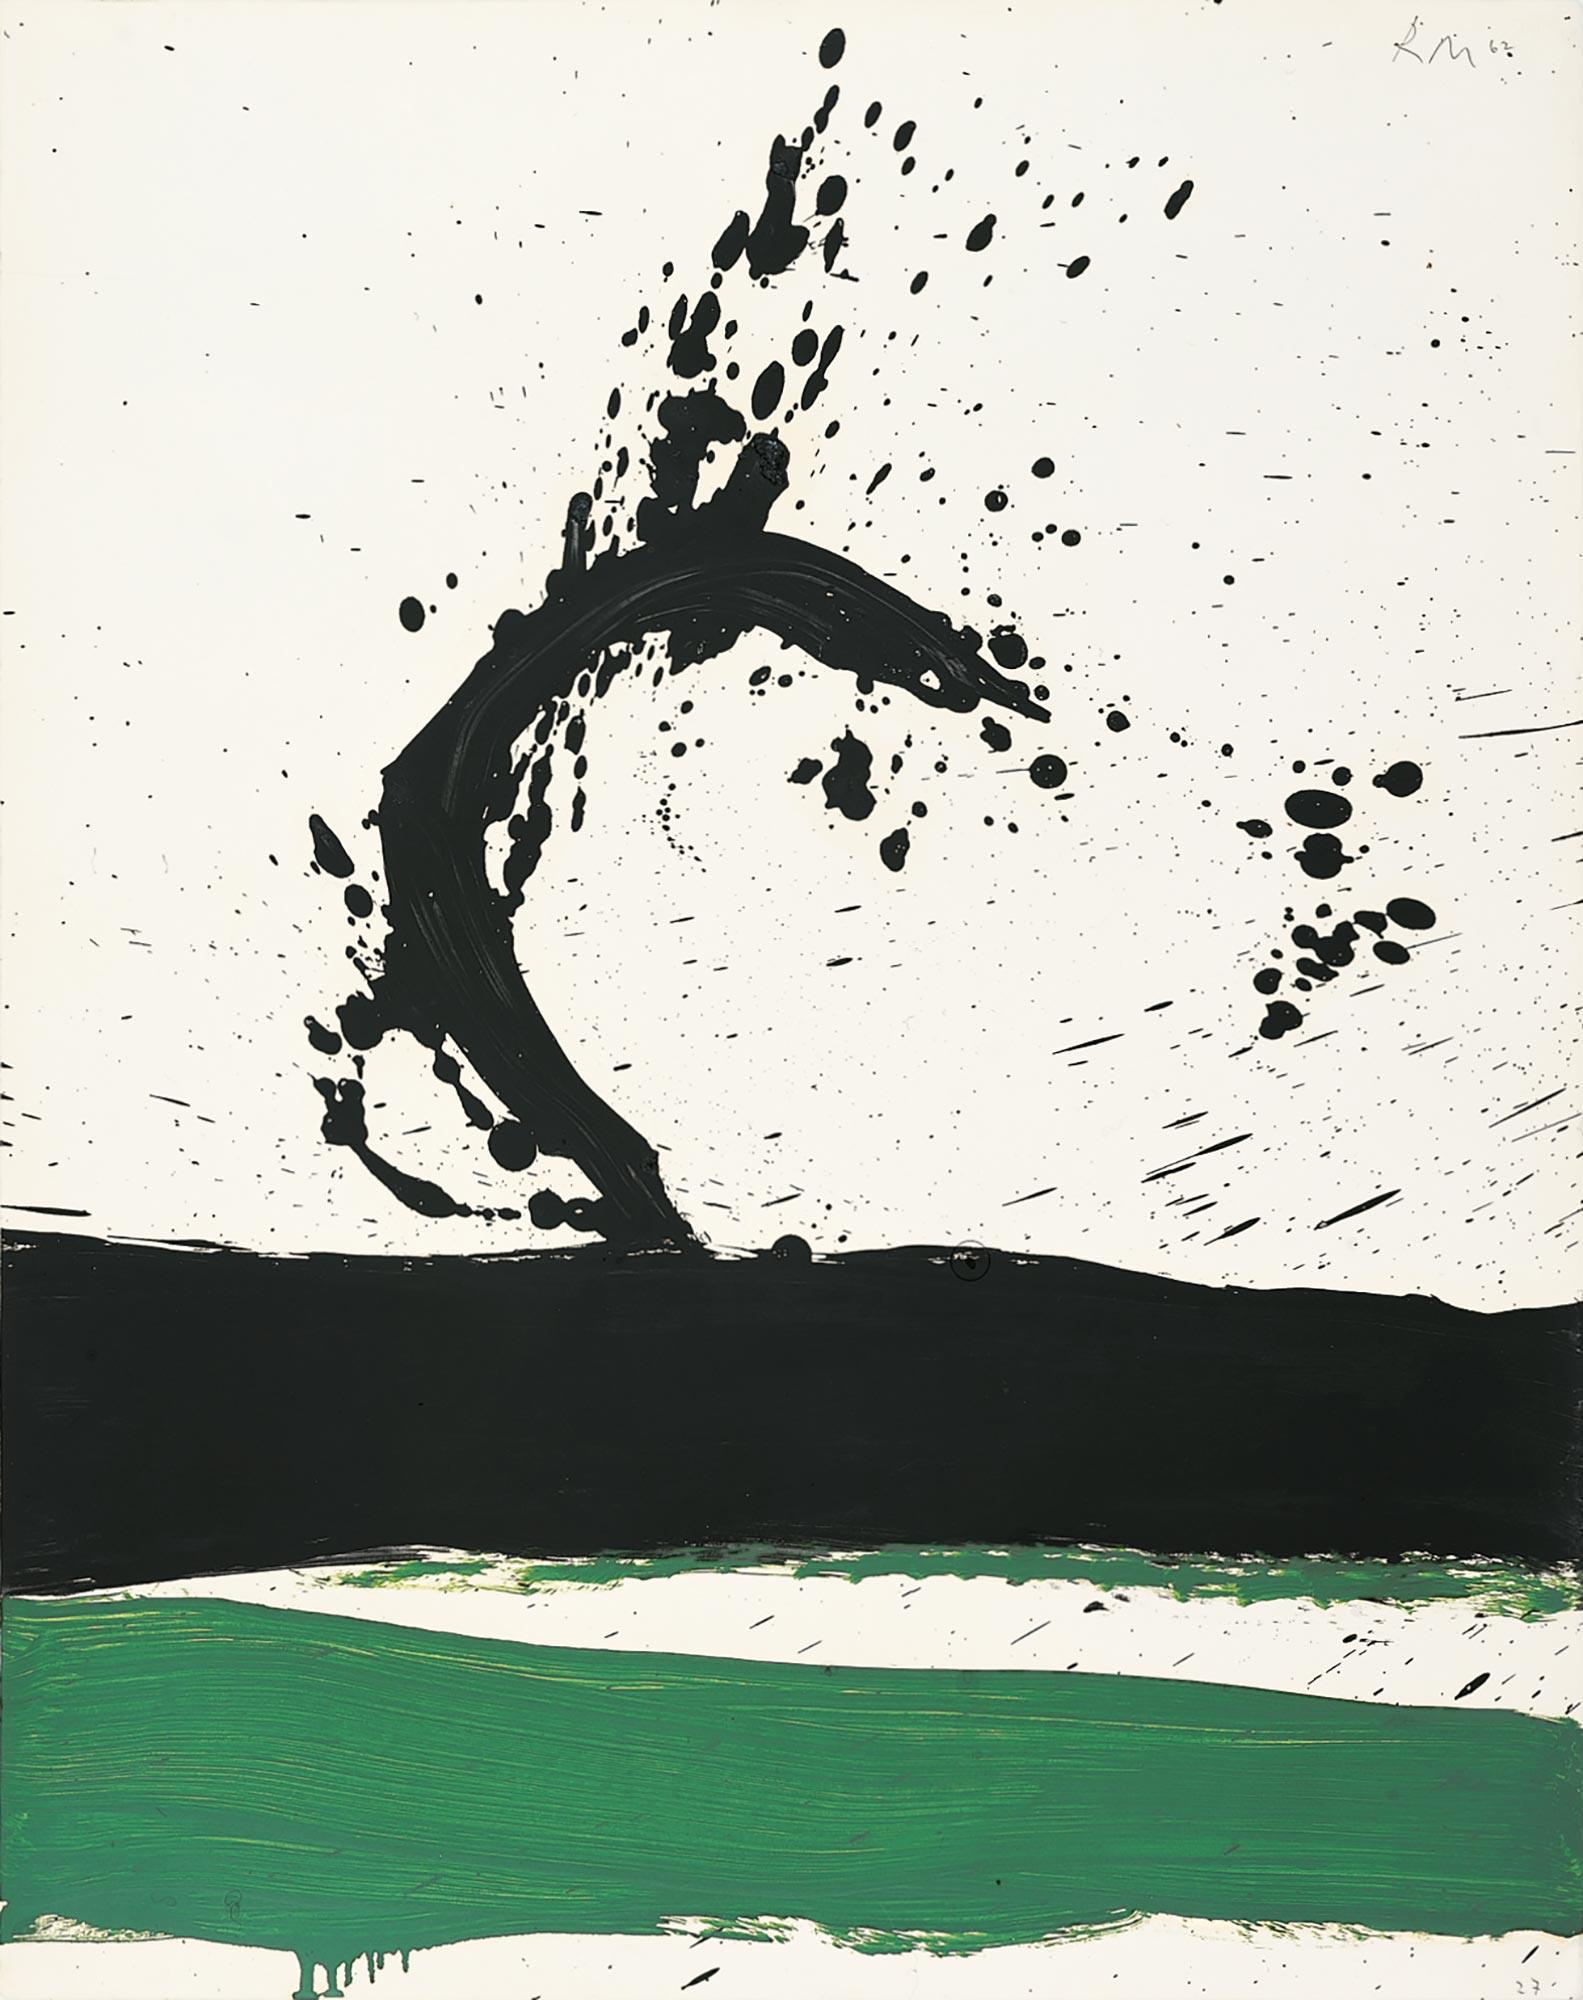 An abstract painting of smeared and splashed green and black paint on a white ground